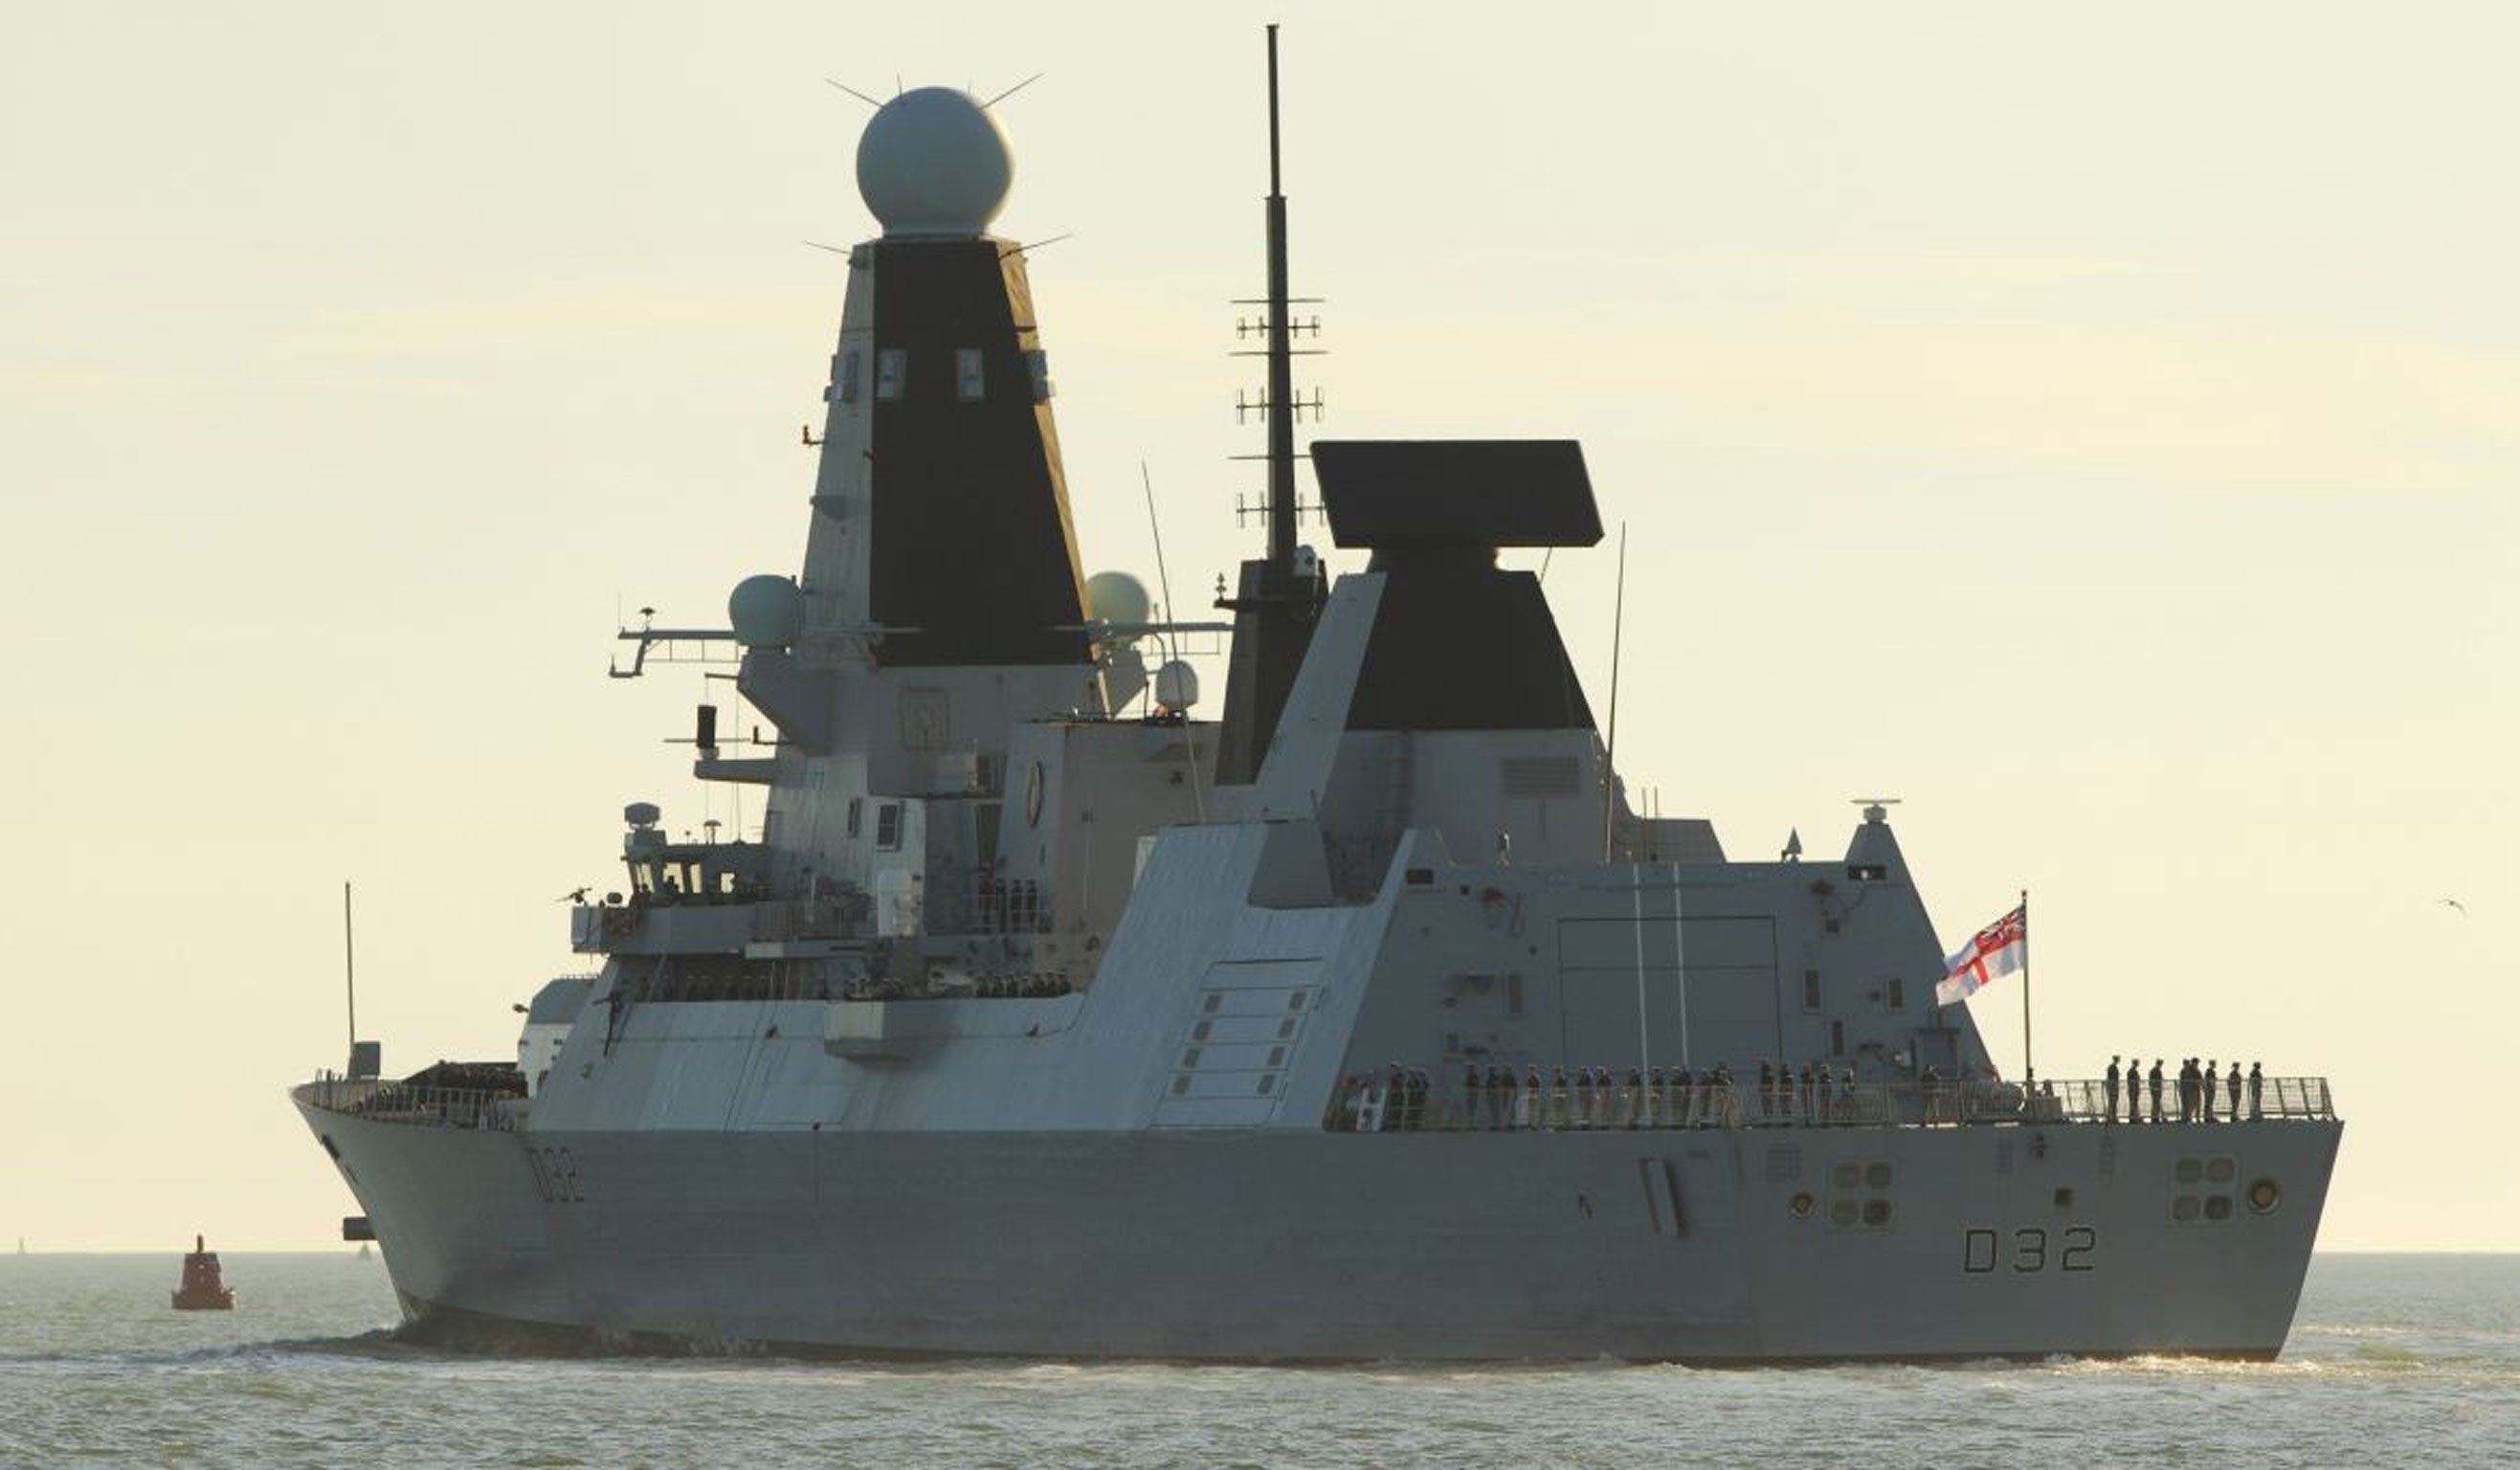 HMS Daring is one of six Type 45 destroyers in the British fleet